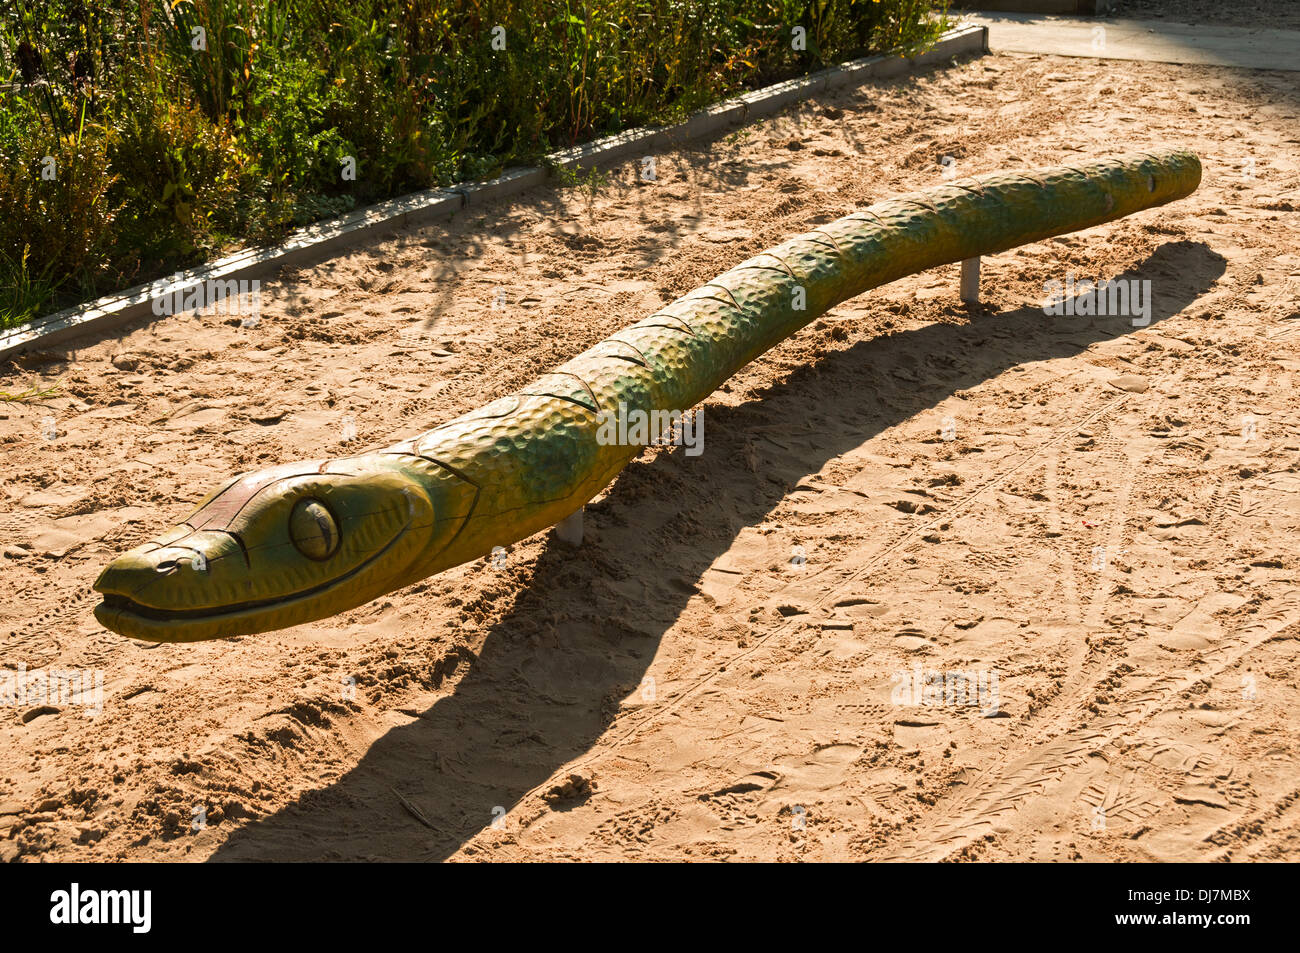 A wooden carved snake at a children's play area, Victoria Street, Manchester, England, UK Stock Photo